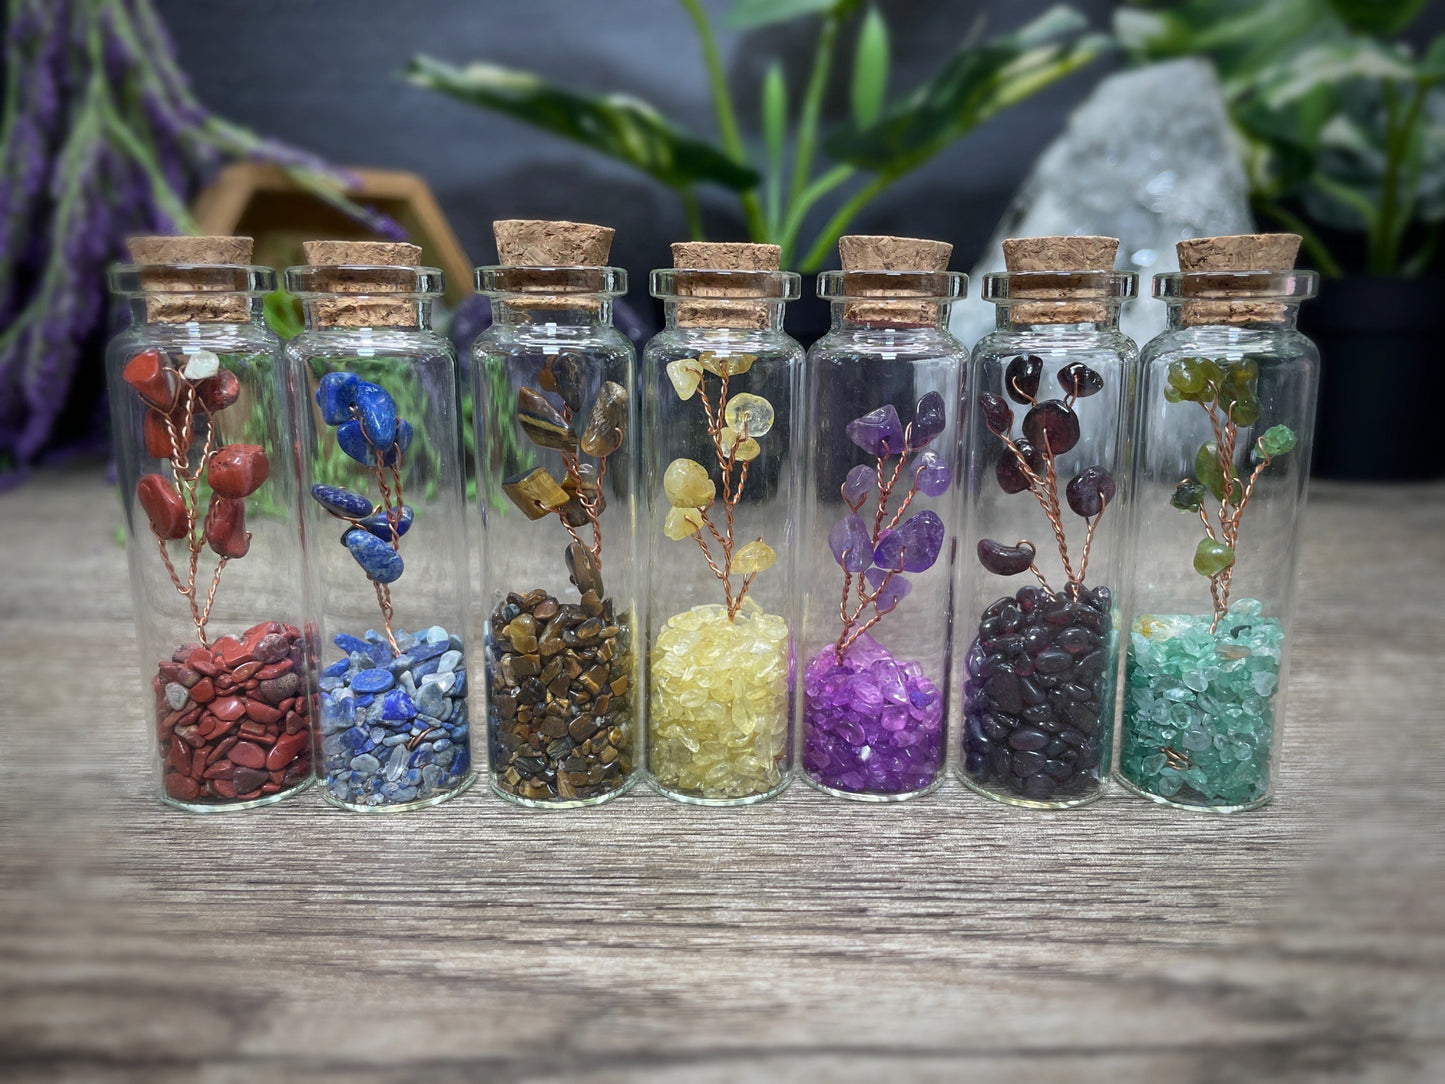 Pictured are various glass vials with various wire-wrapped crystal trees inside.